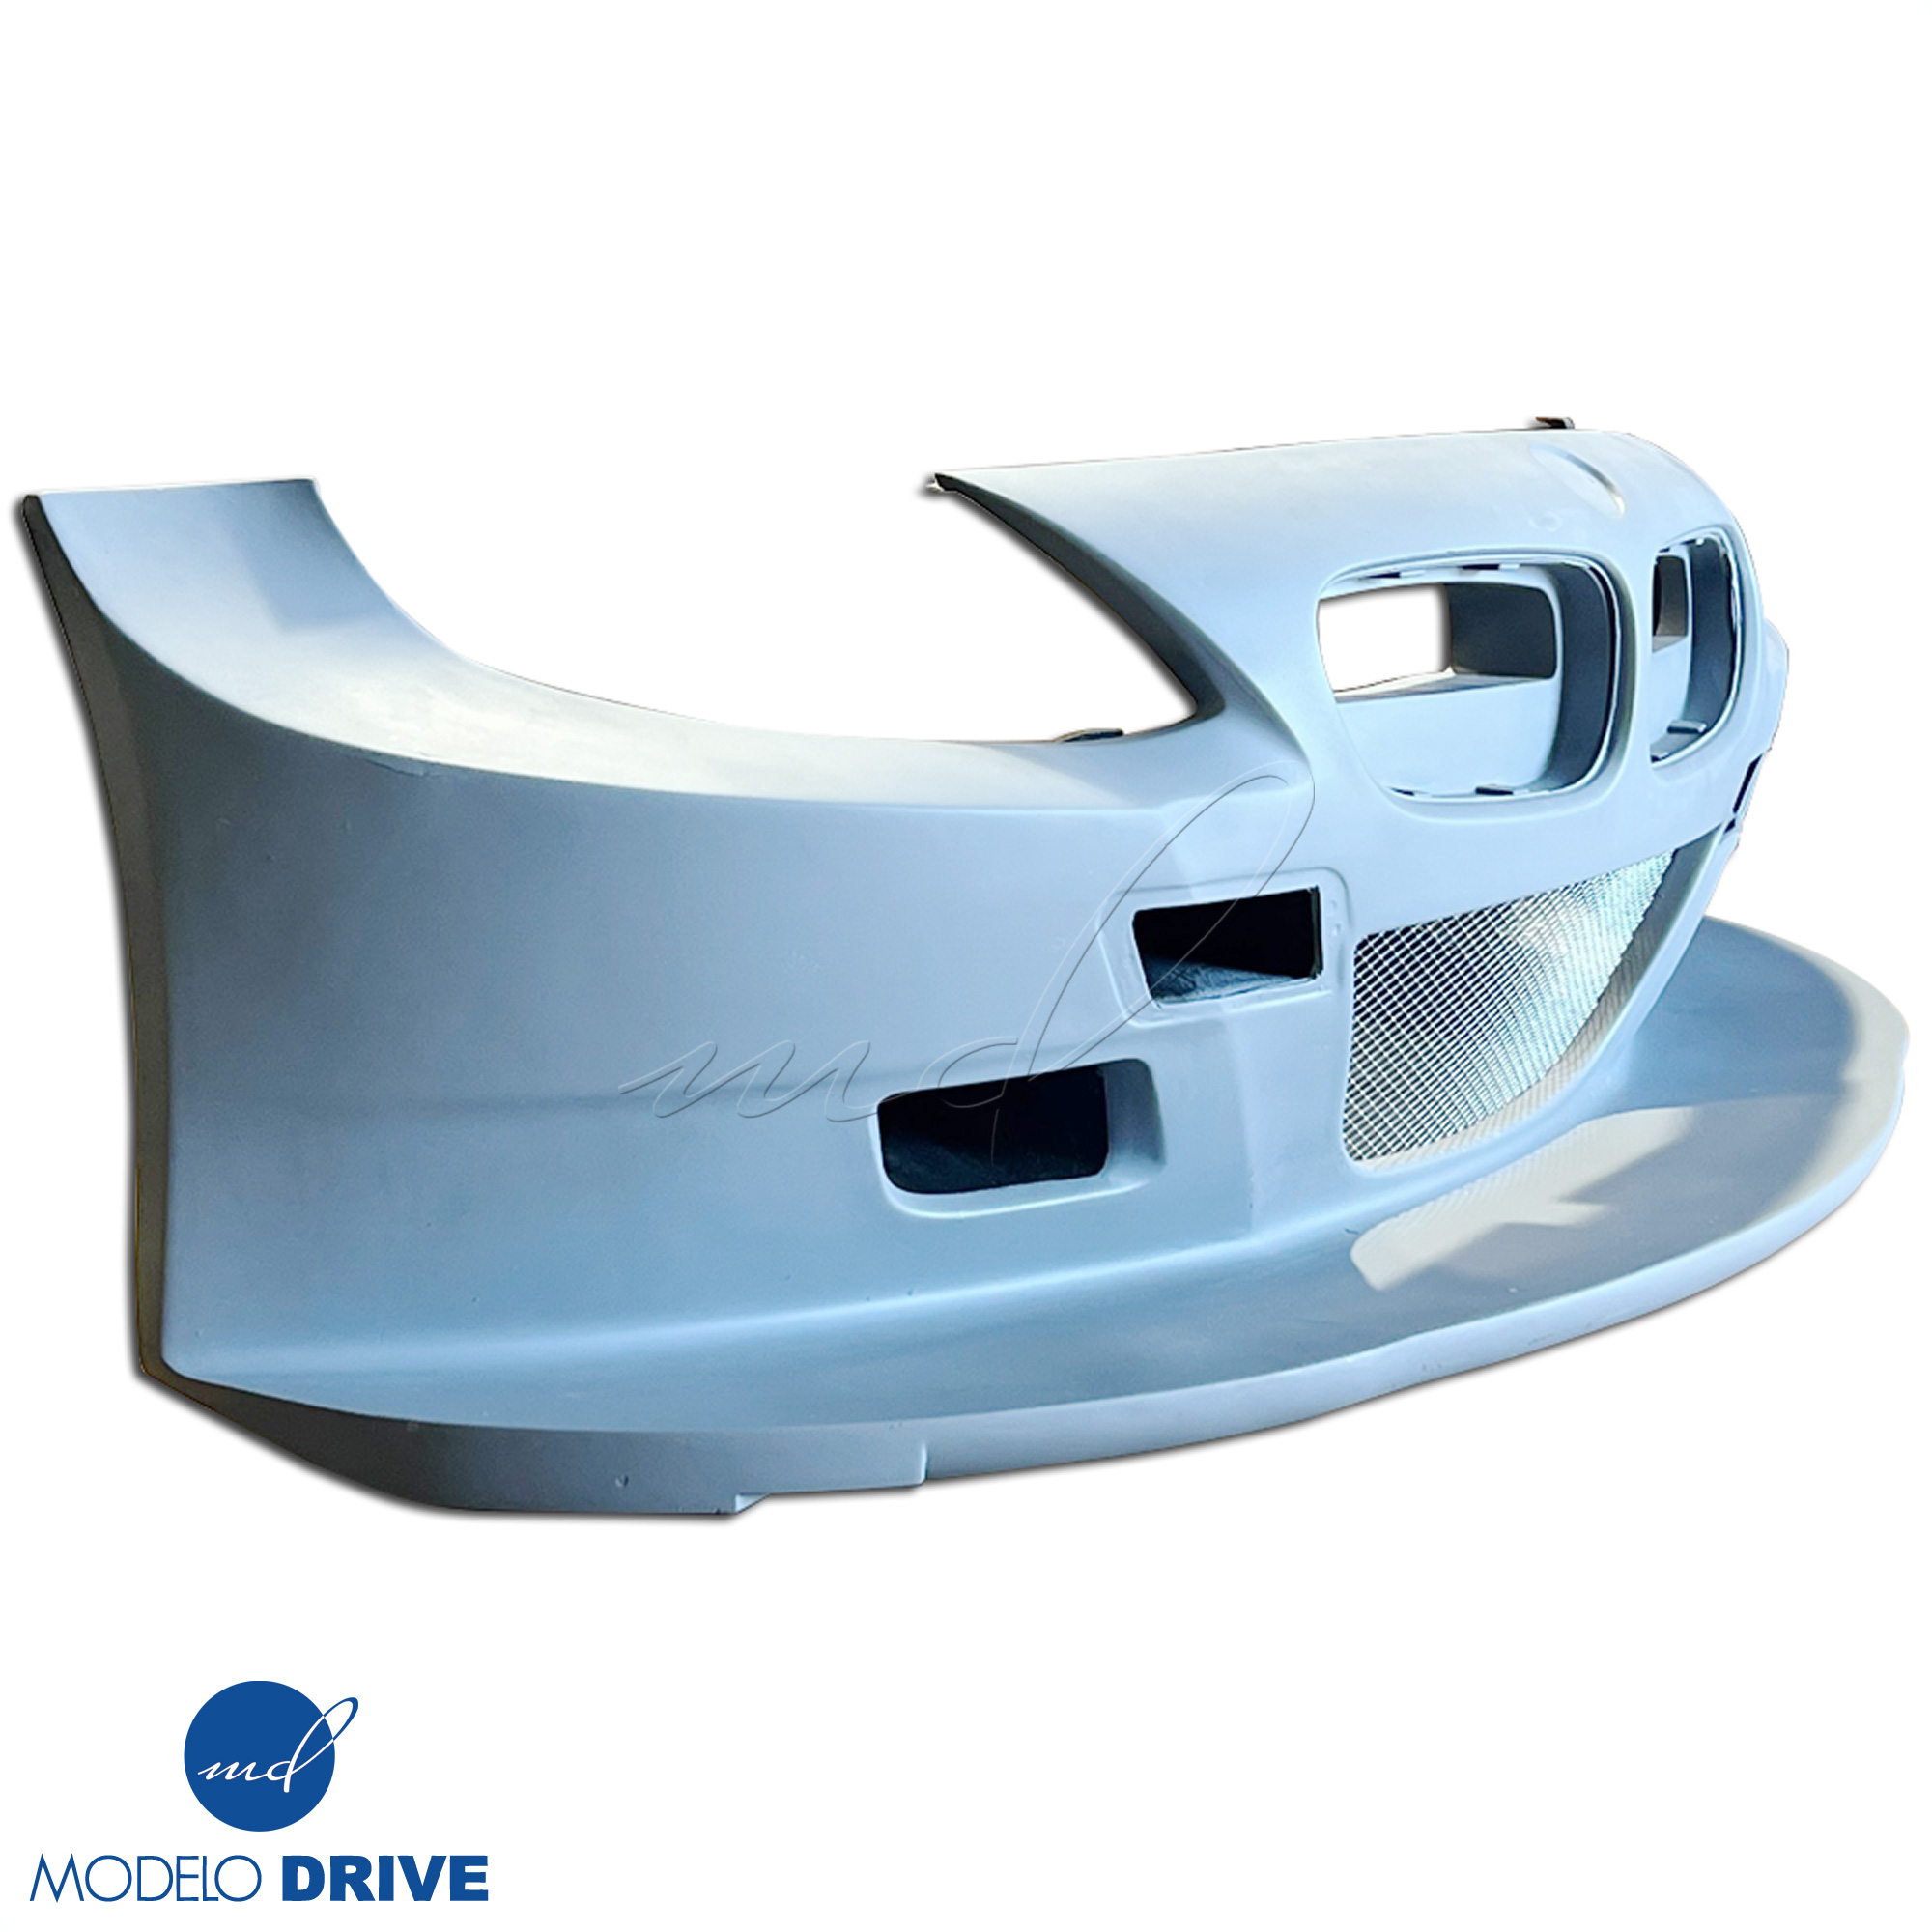 ModeloDrive FRP GTR Wide Body Front Bumper > BMW Z4 E86 2003-2008 > 3dr Coupe - Image 3